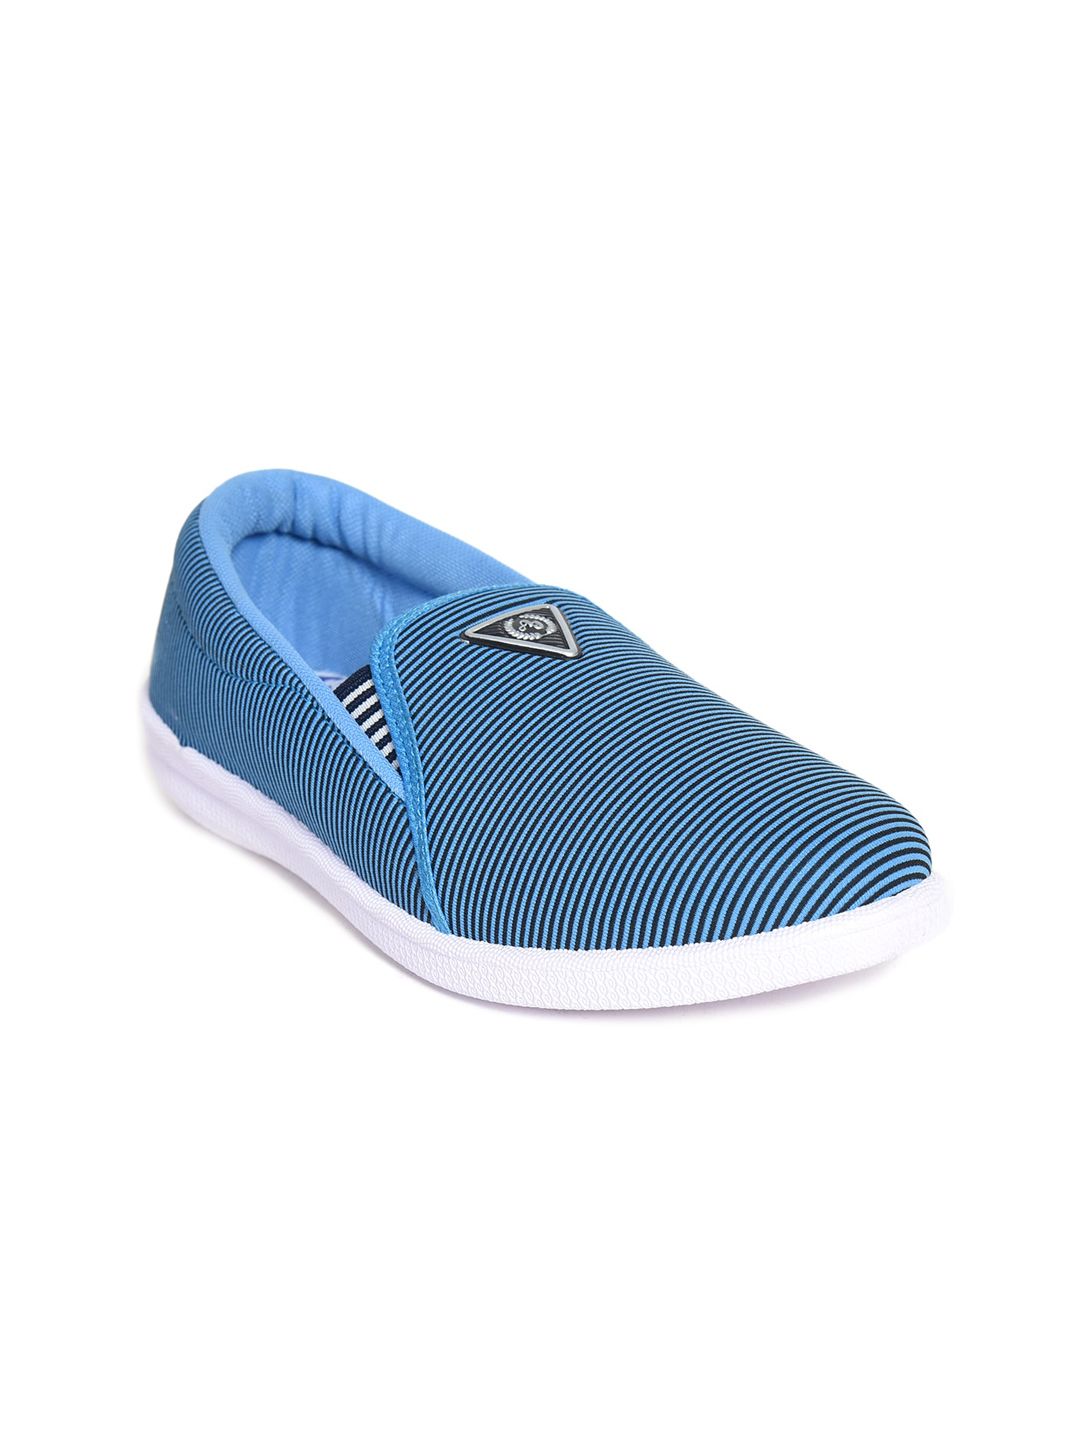 Ajanta Women Striped Lightweight Comfort Insole Contrast Sole Slip-On Sneakers Price in India